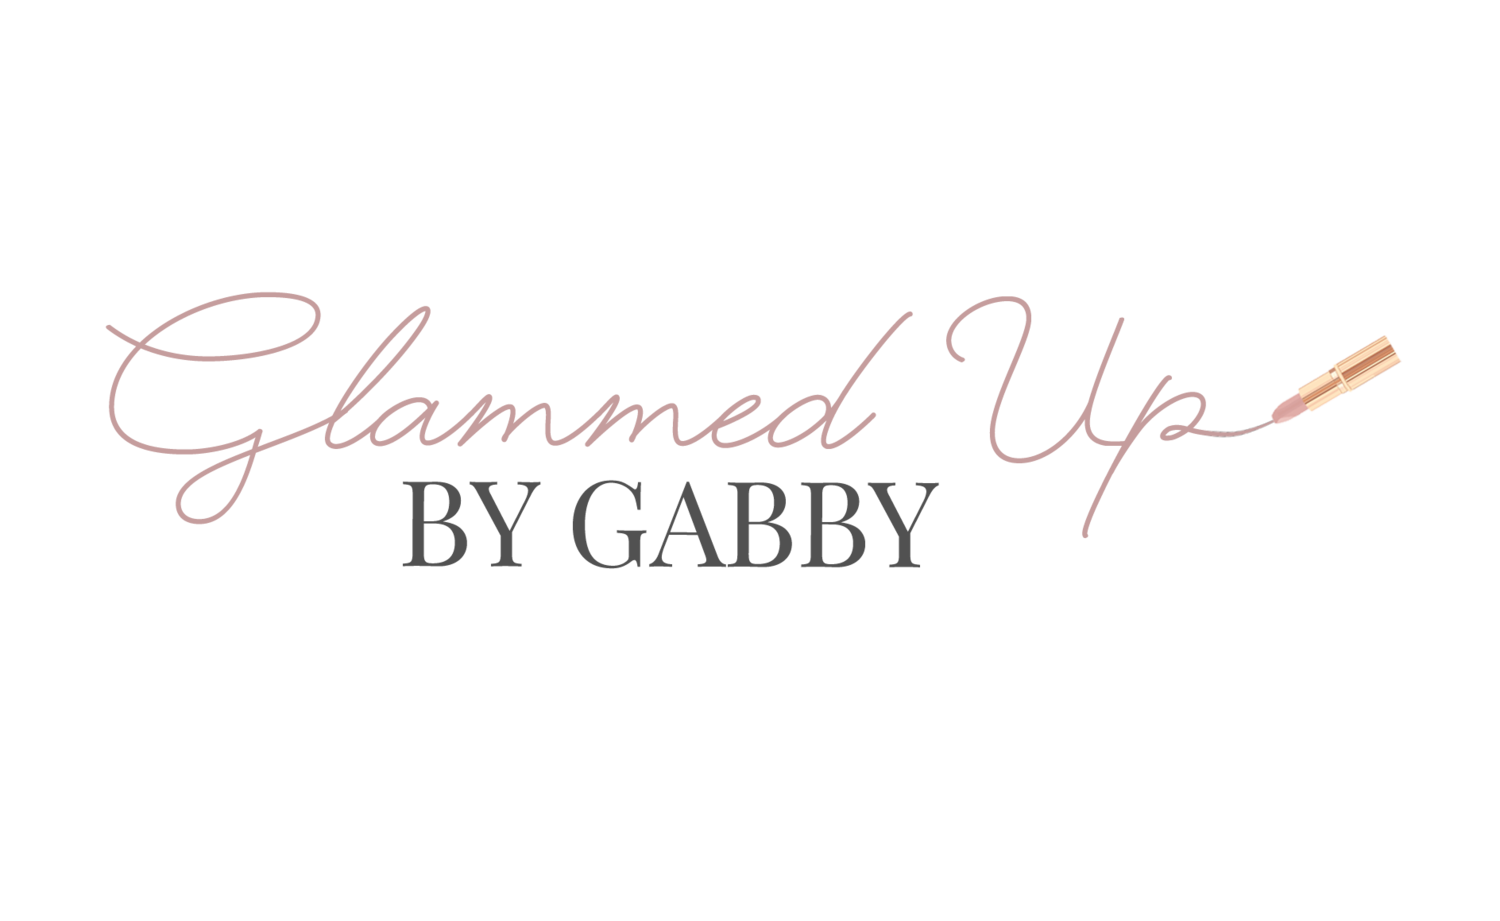 GLAMMED UP BY GABBY